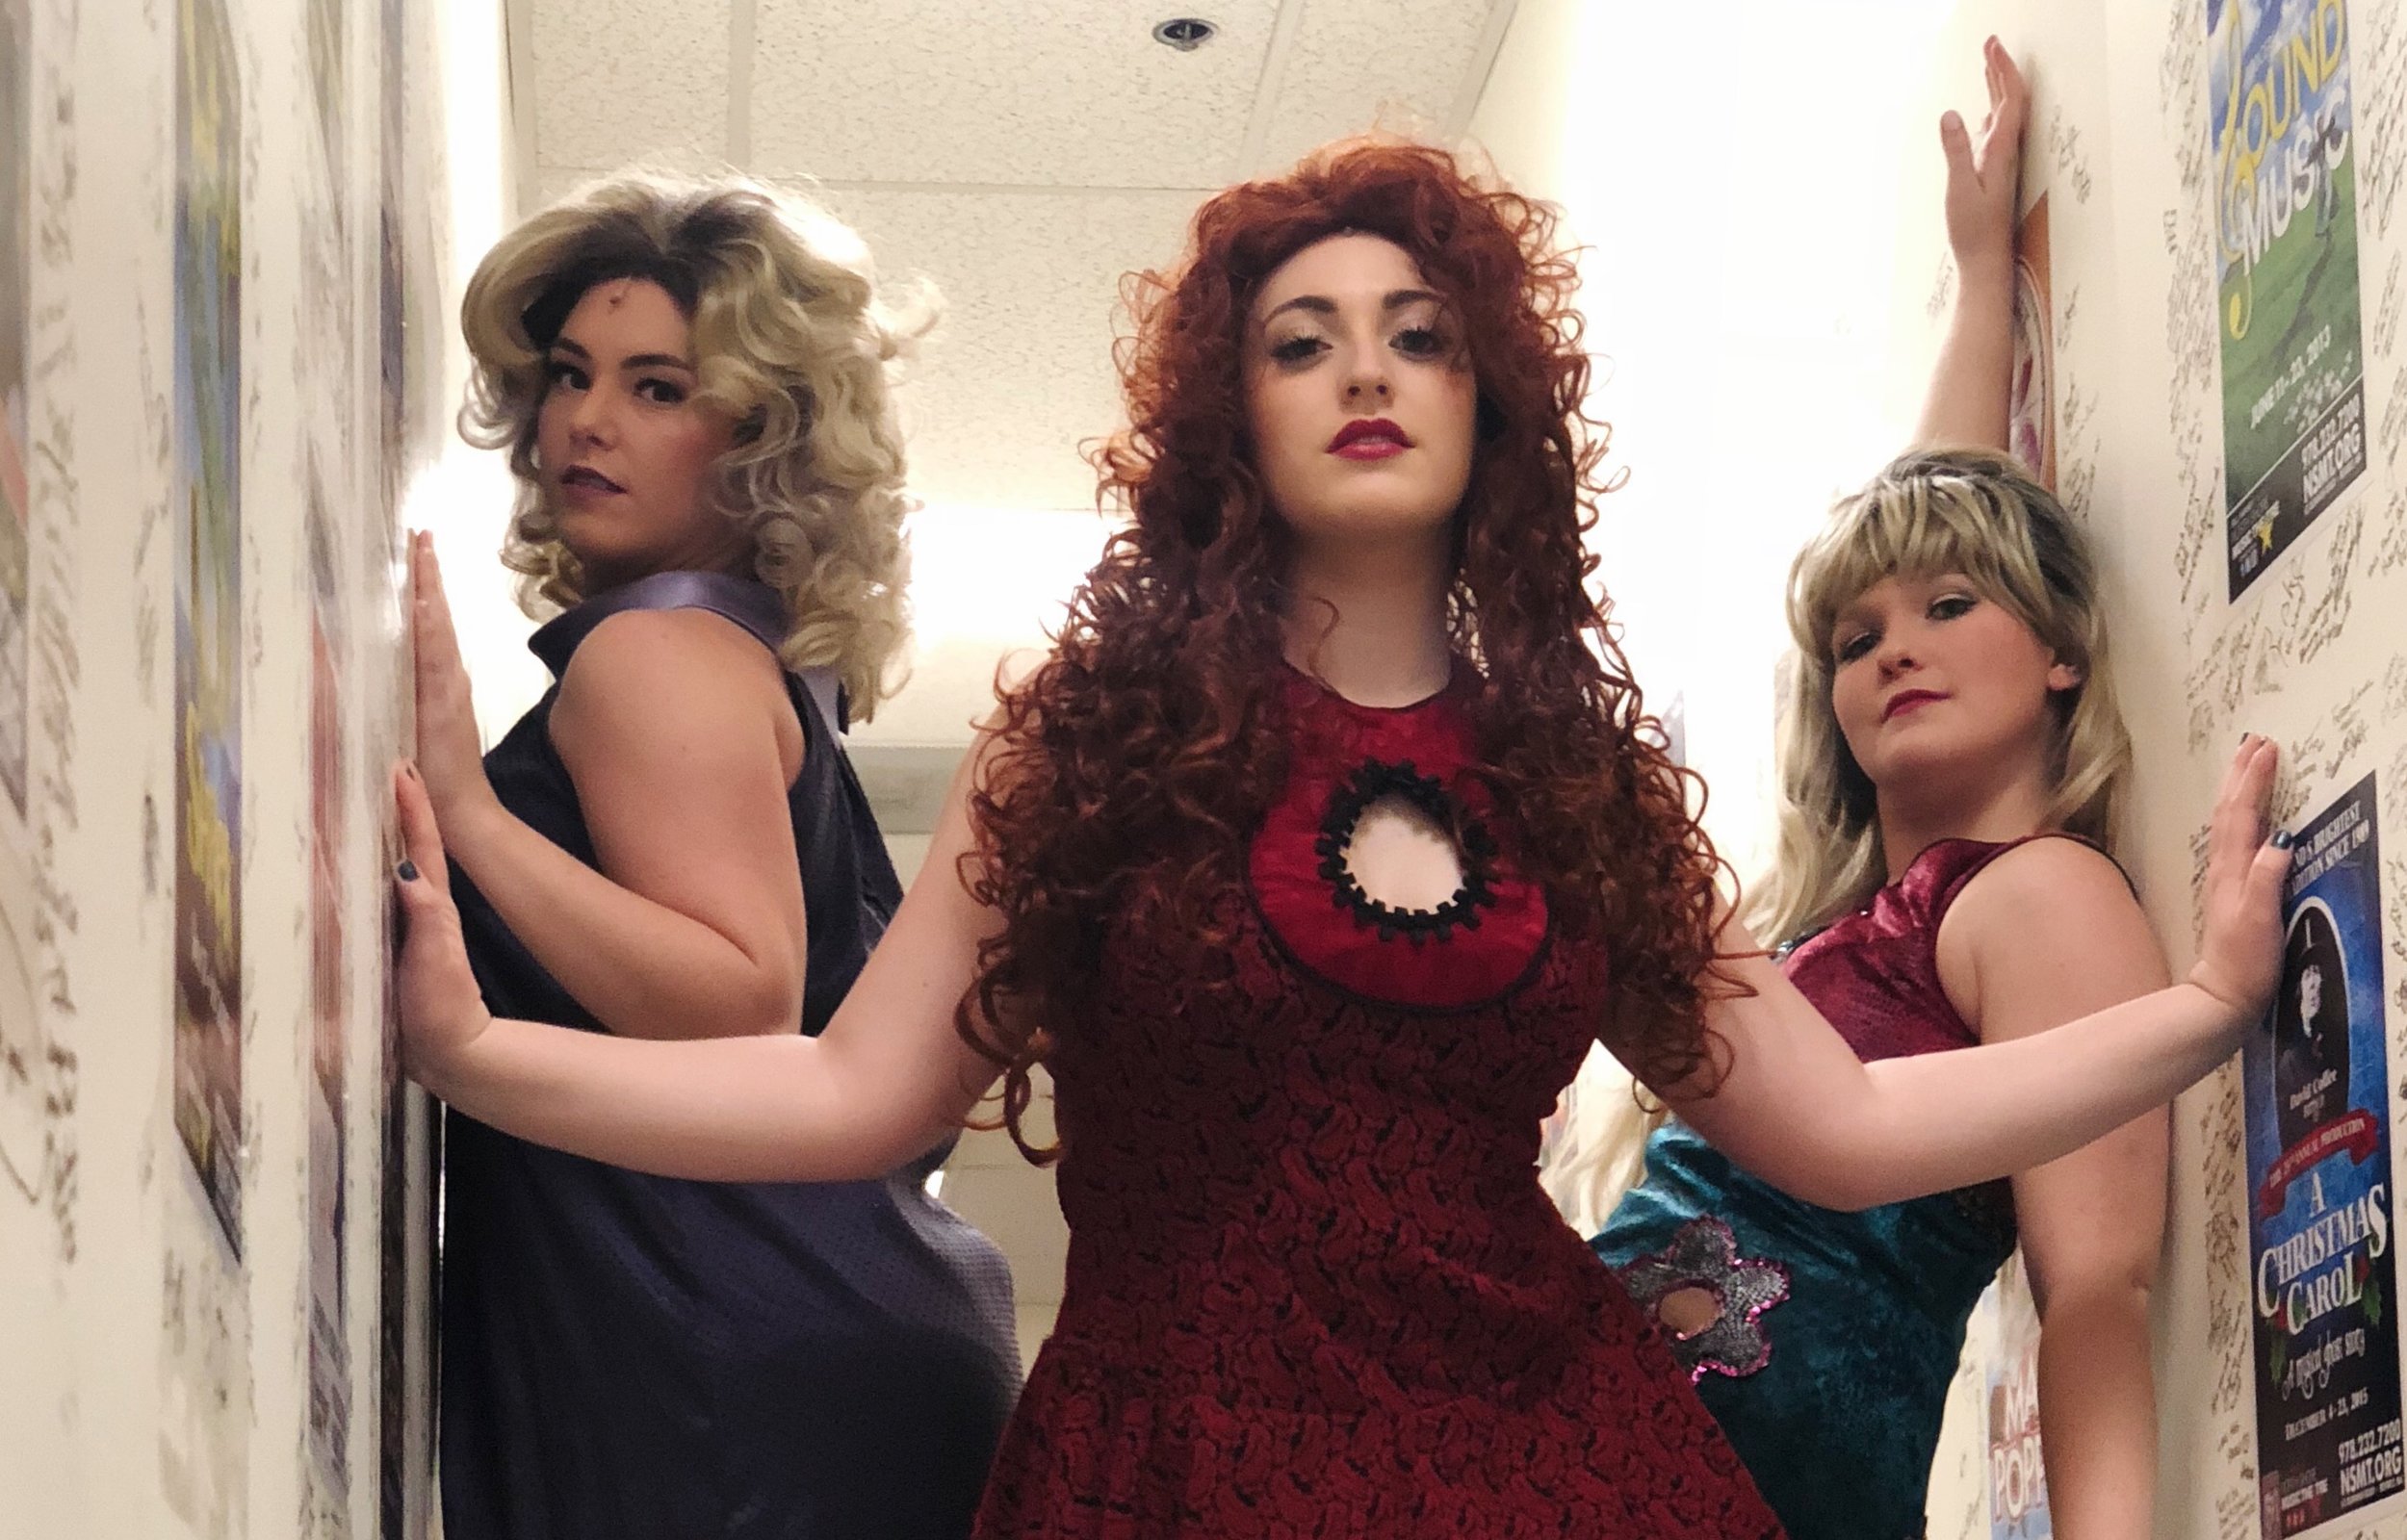  The “Hookers” from the Dollhouse (NSMT HAIRSPRAY 2018) 